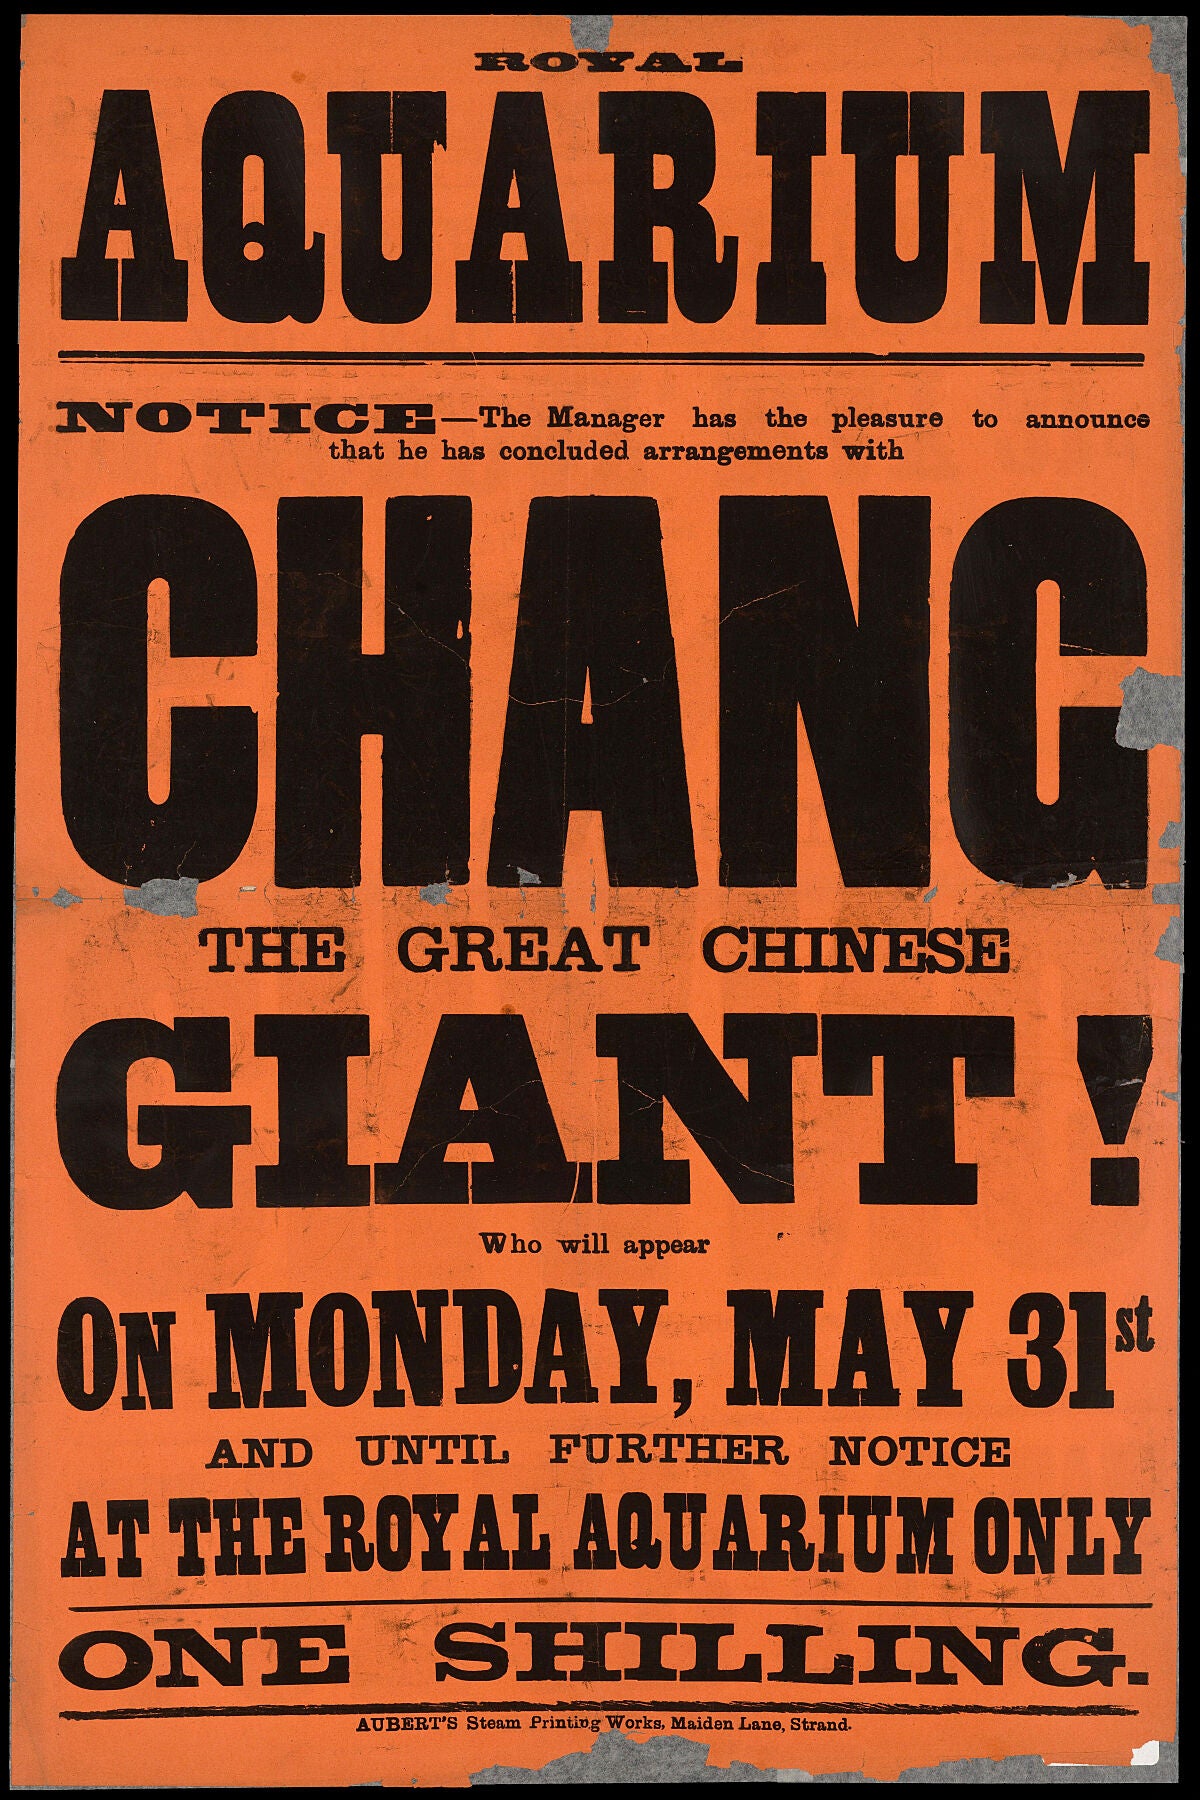 Poster, printed in black on orange paper, advertising the appearance of Chang, a chinese giant (over 8 feet tall) in some sort of variety show at the Royal Aquarium (a large exhibition hall and theatre built in 1876 and demolished in 1902 on the site of the current Central Hall opposite Westminster Abbey, London). The poster was printed by Aubert's Steam Printing Works in Maiden Lane, Strand, London.